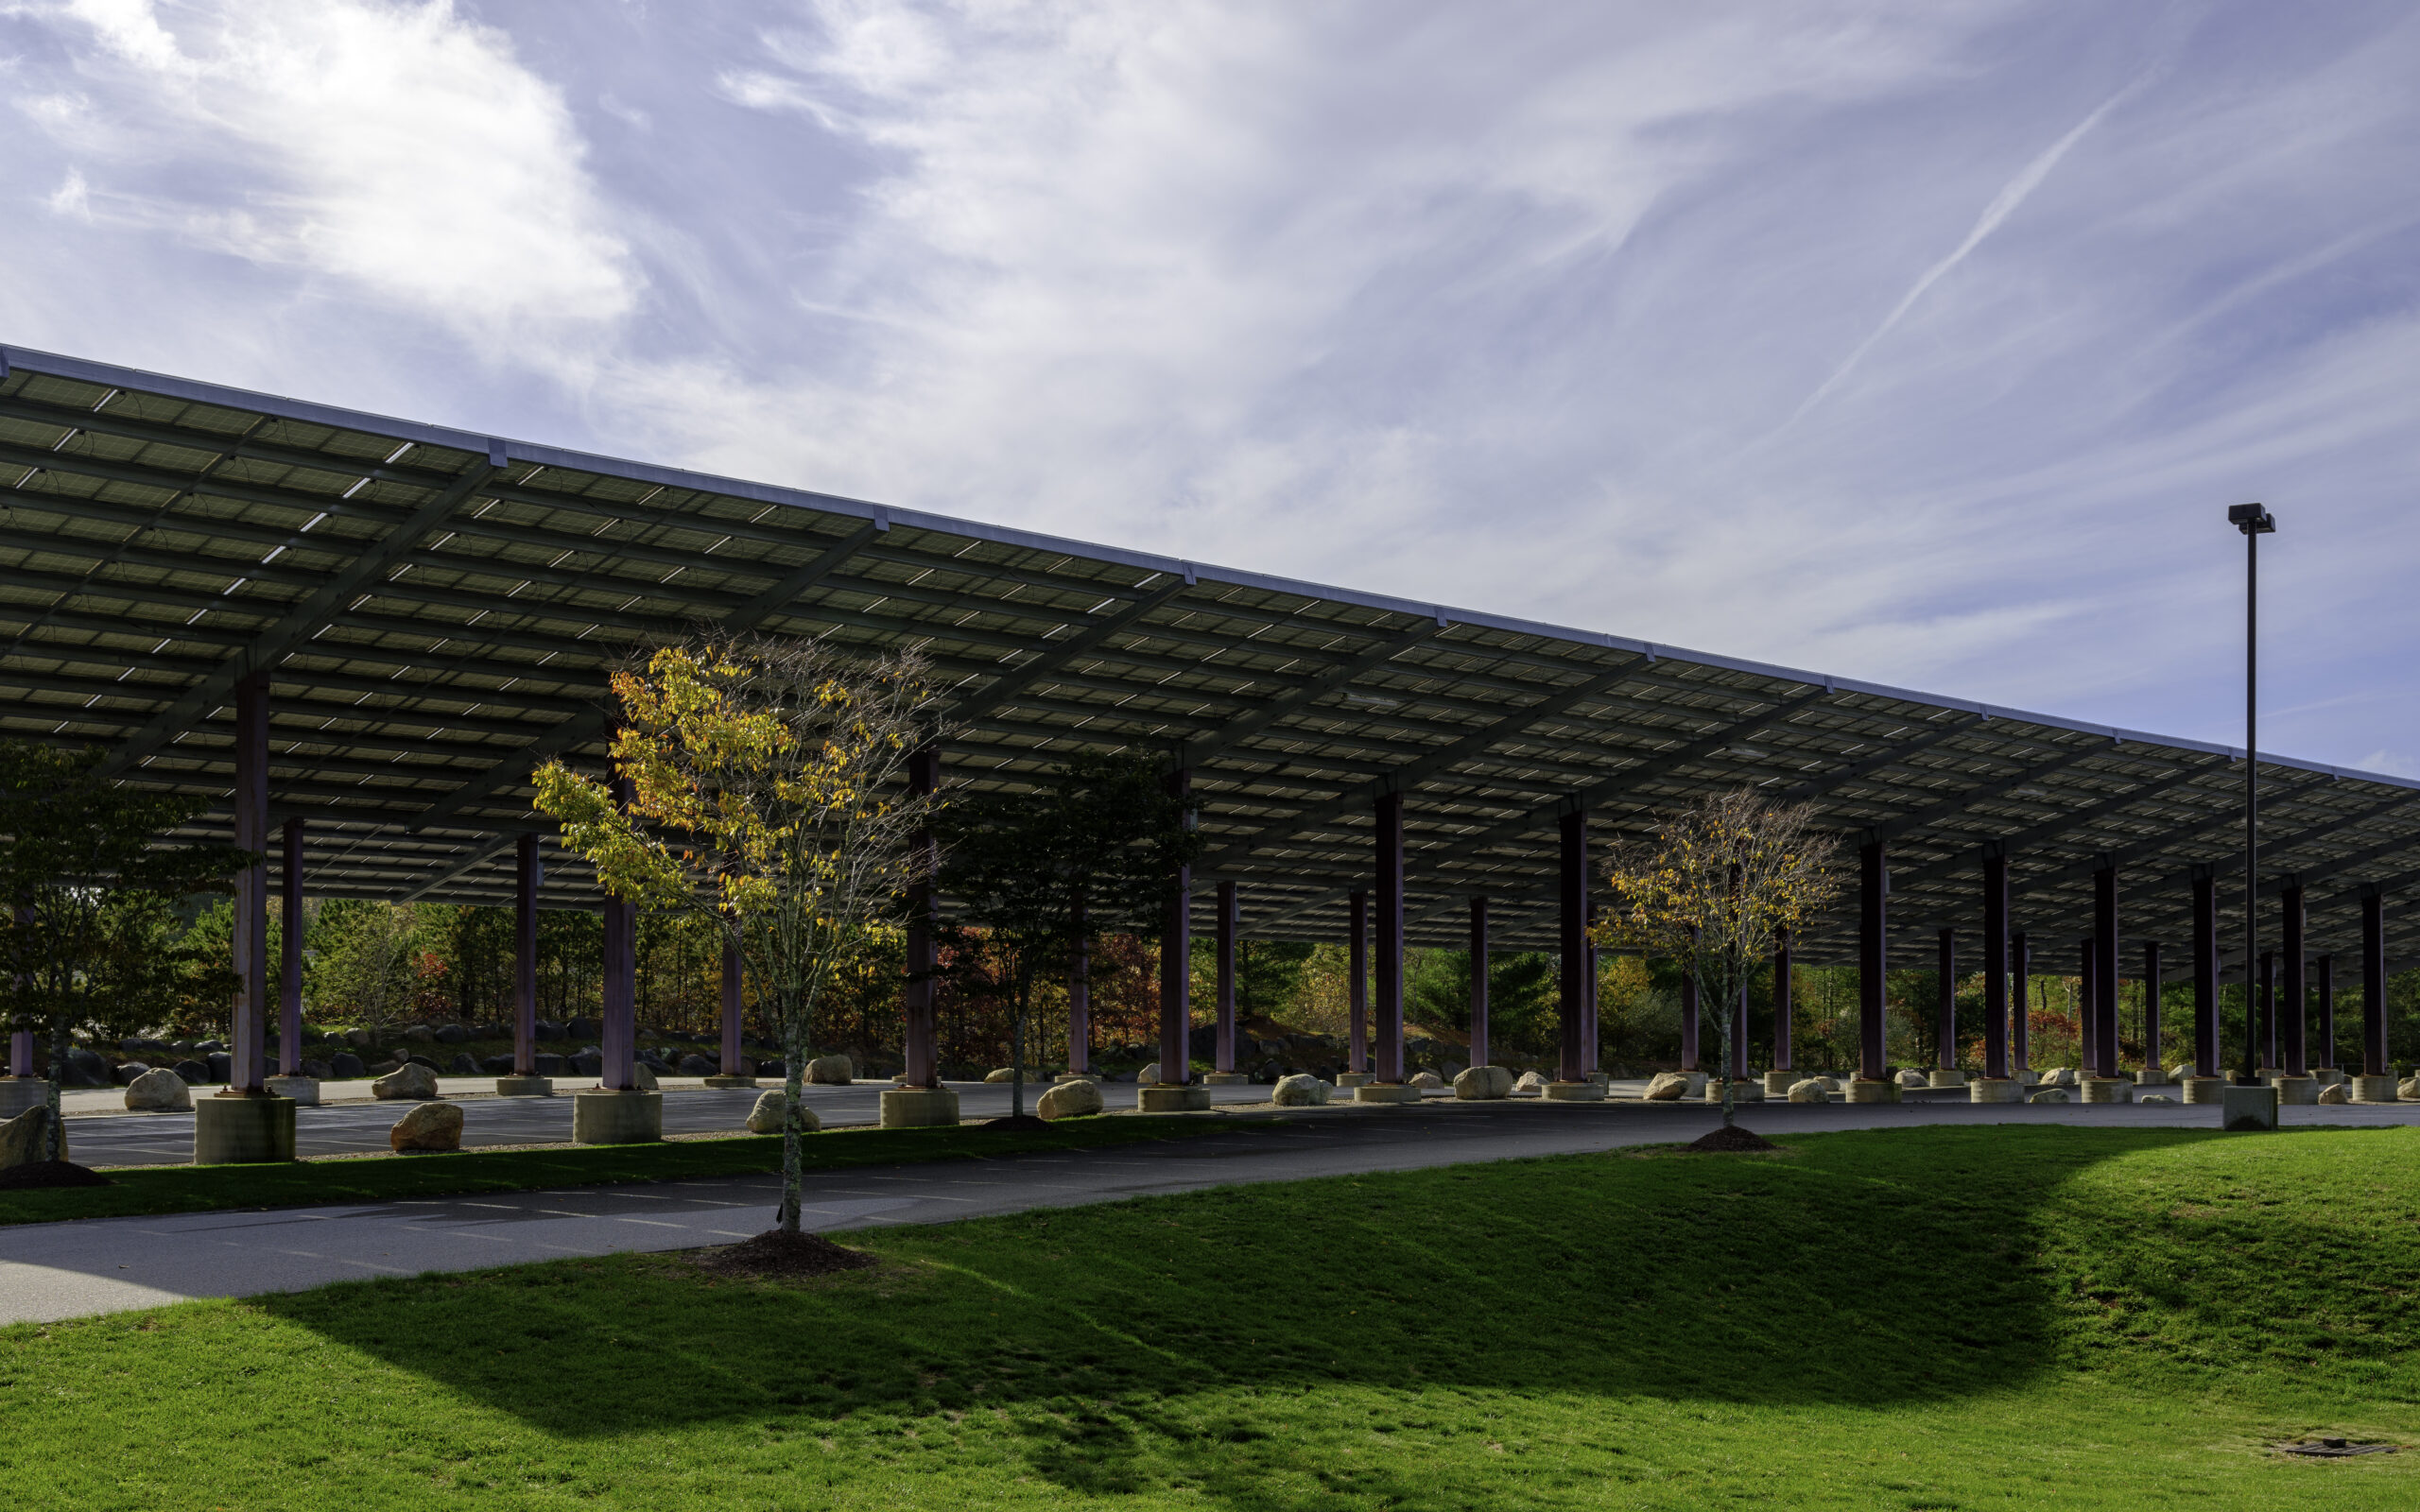 Solar panel covered parking lot with green lawn and colorful maple trees